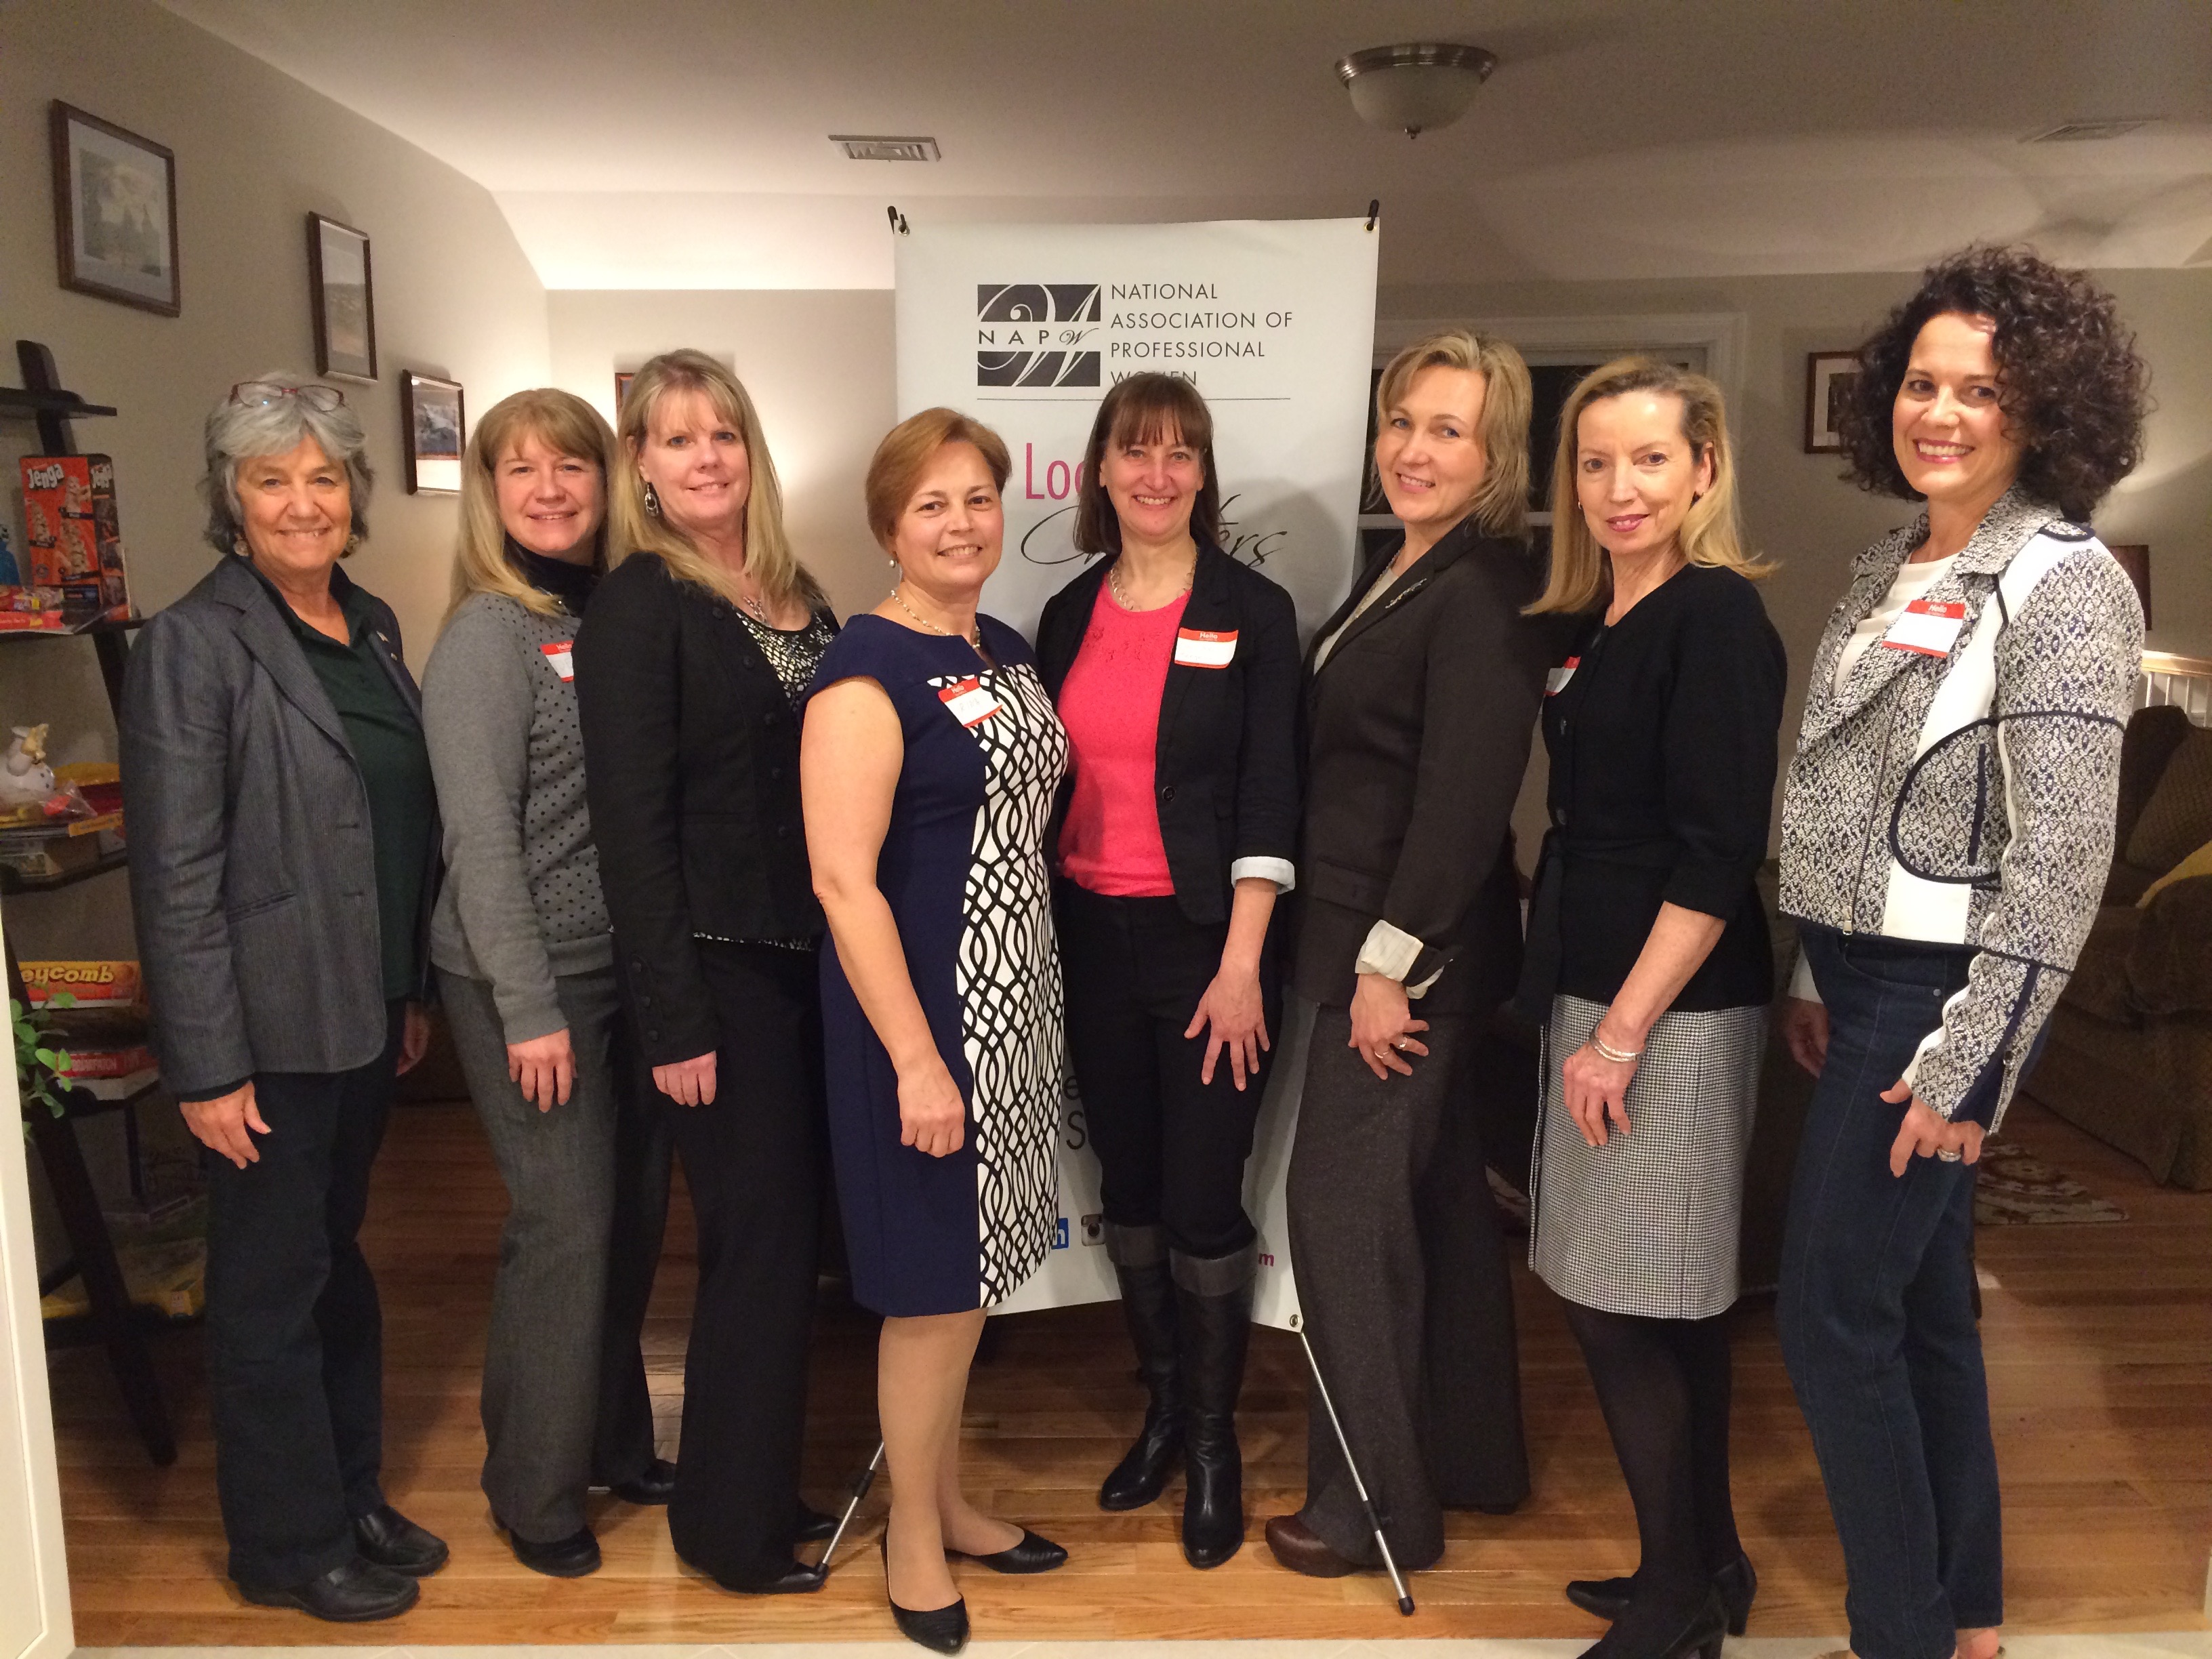 The NAPW Merrimack Valley, MA women enjoying a great networking event in March.